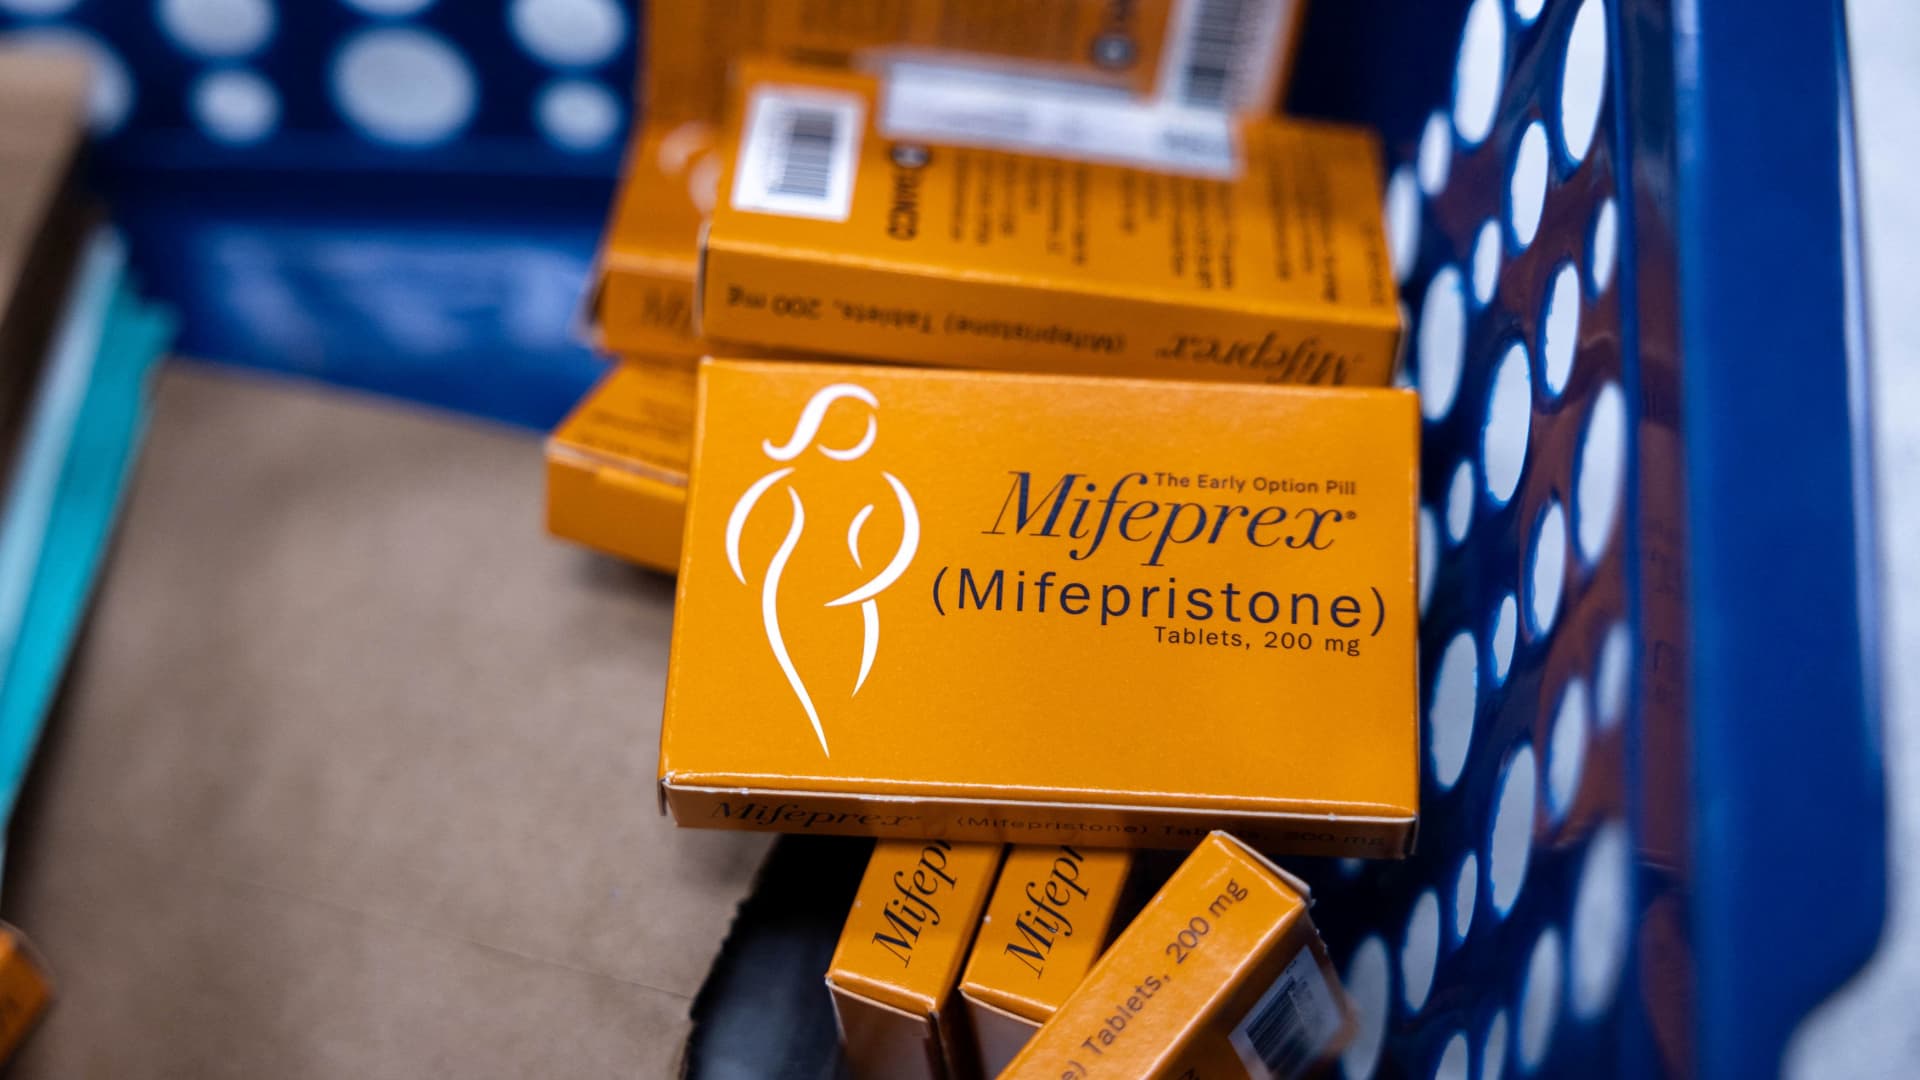 Boxes of the medication Mifepristone used to induce a medical abortion are prepared for patients at Planned Parenthood health center in Birmingham, Alabama, March 14, 2022.